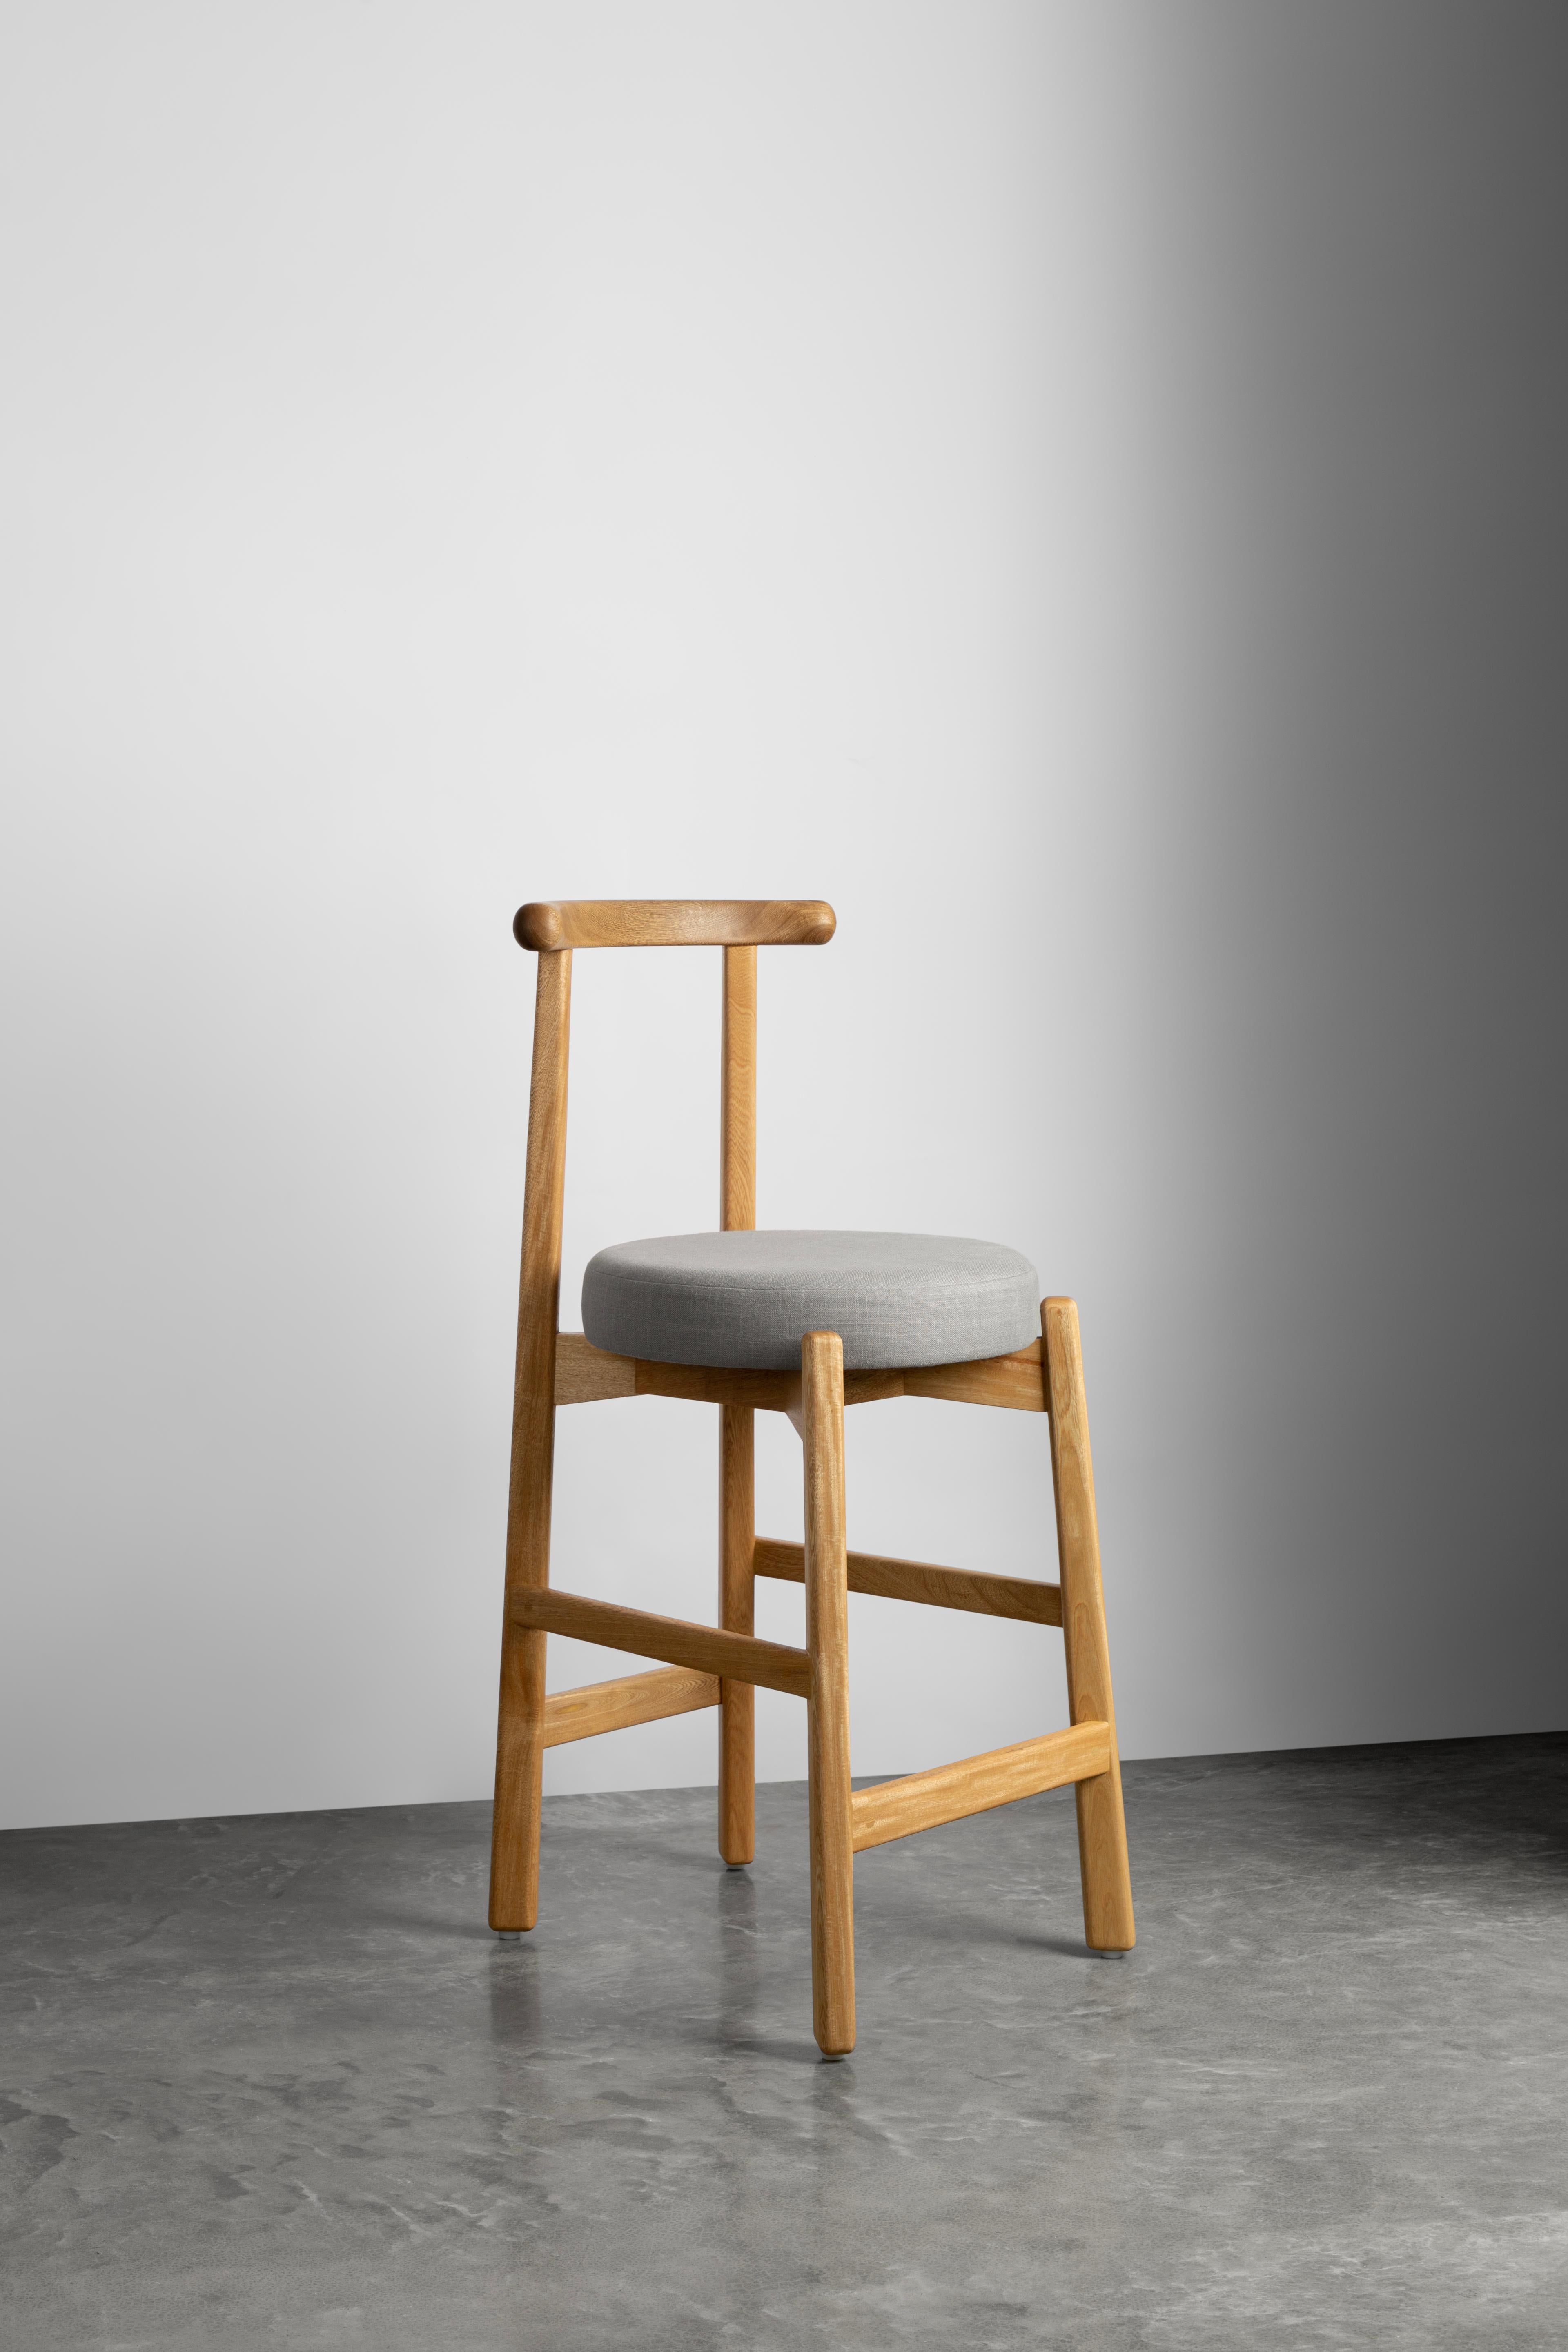 This stool comes from one of our best-selling pieces: the Colima chair. Available in two
different versions, this stool is ideal for the kitchen bar or a perch table. Made of solid wood with fabric upholstered seat, you can have many different